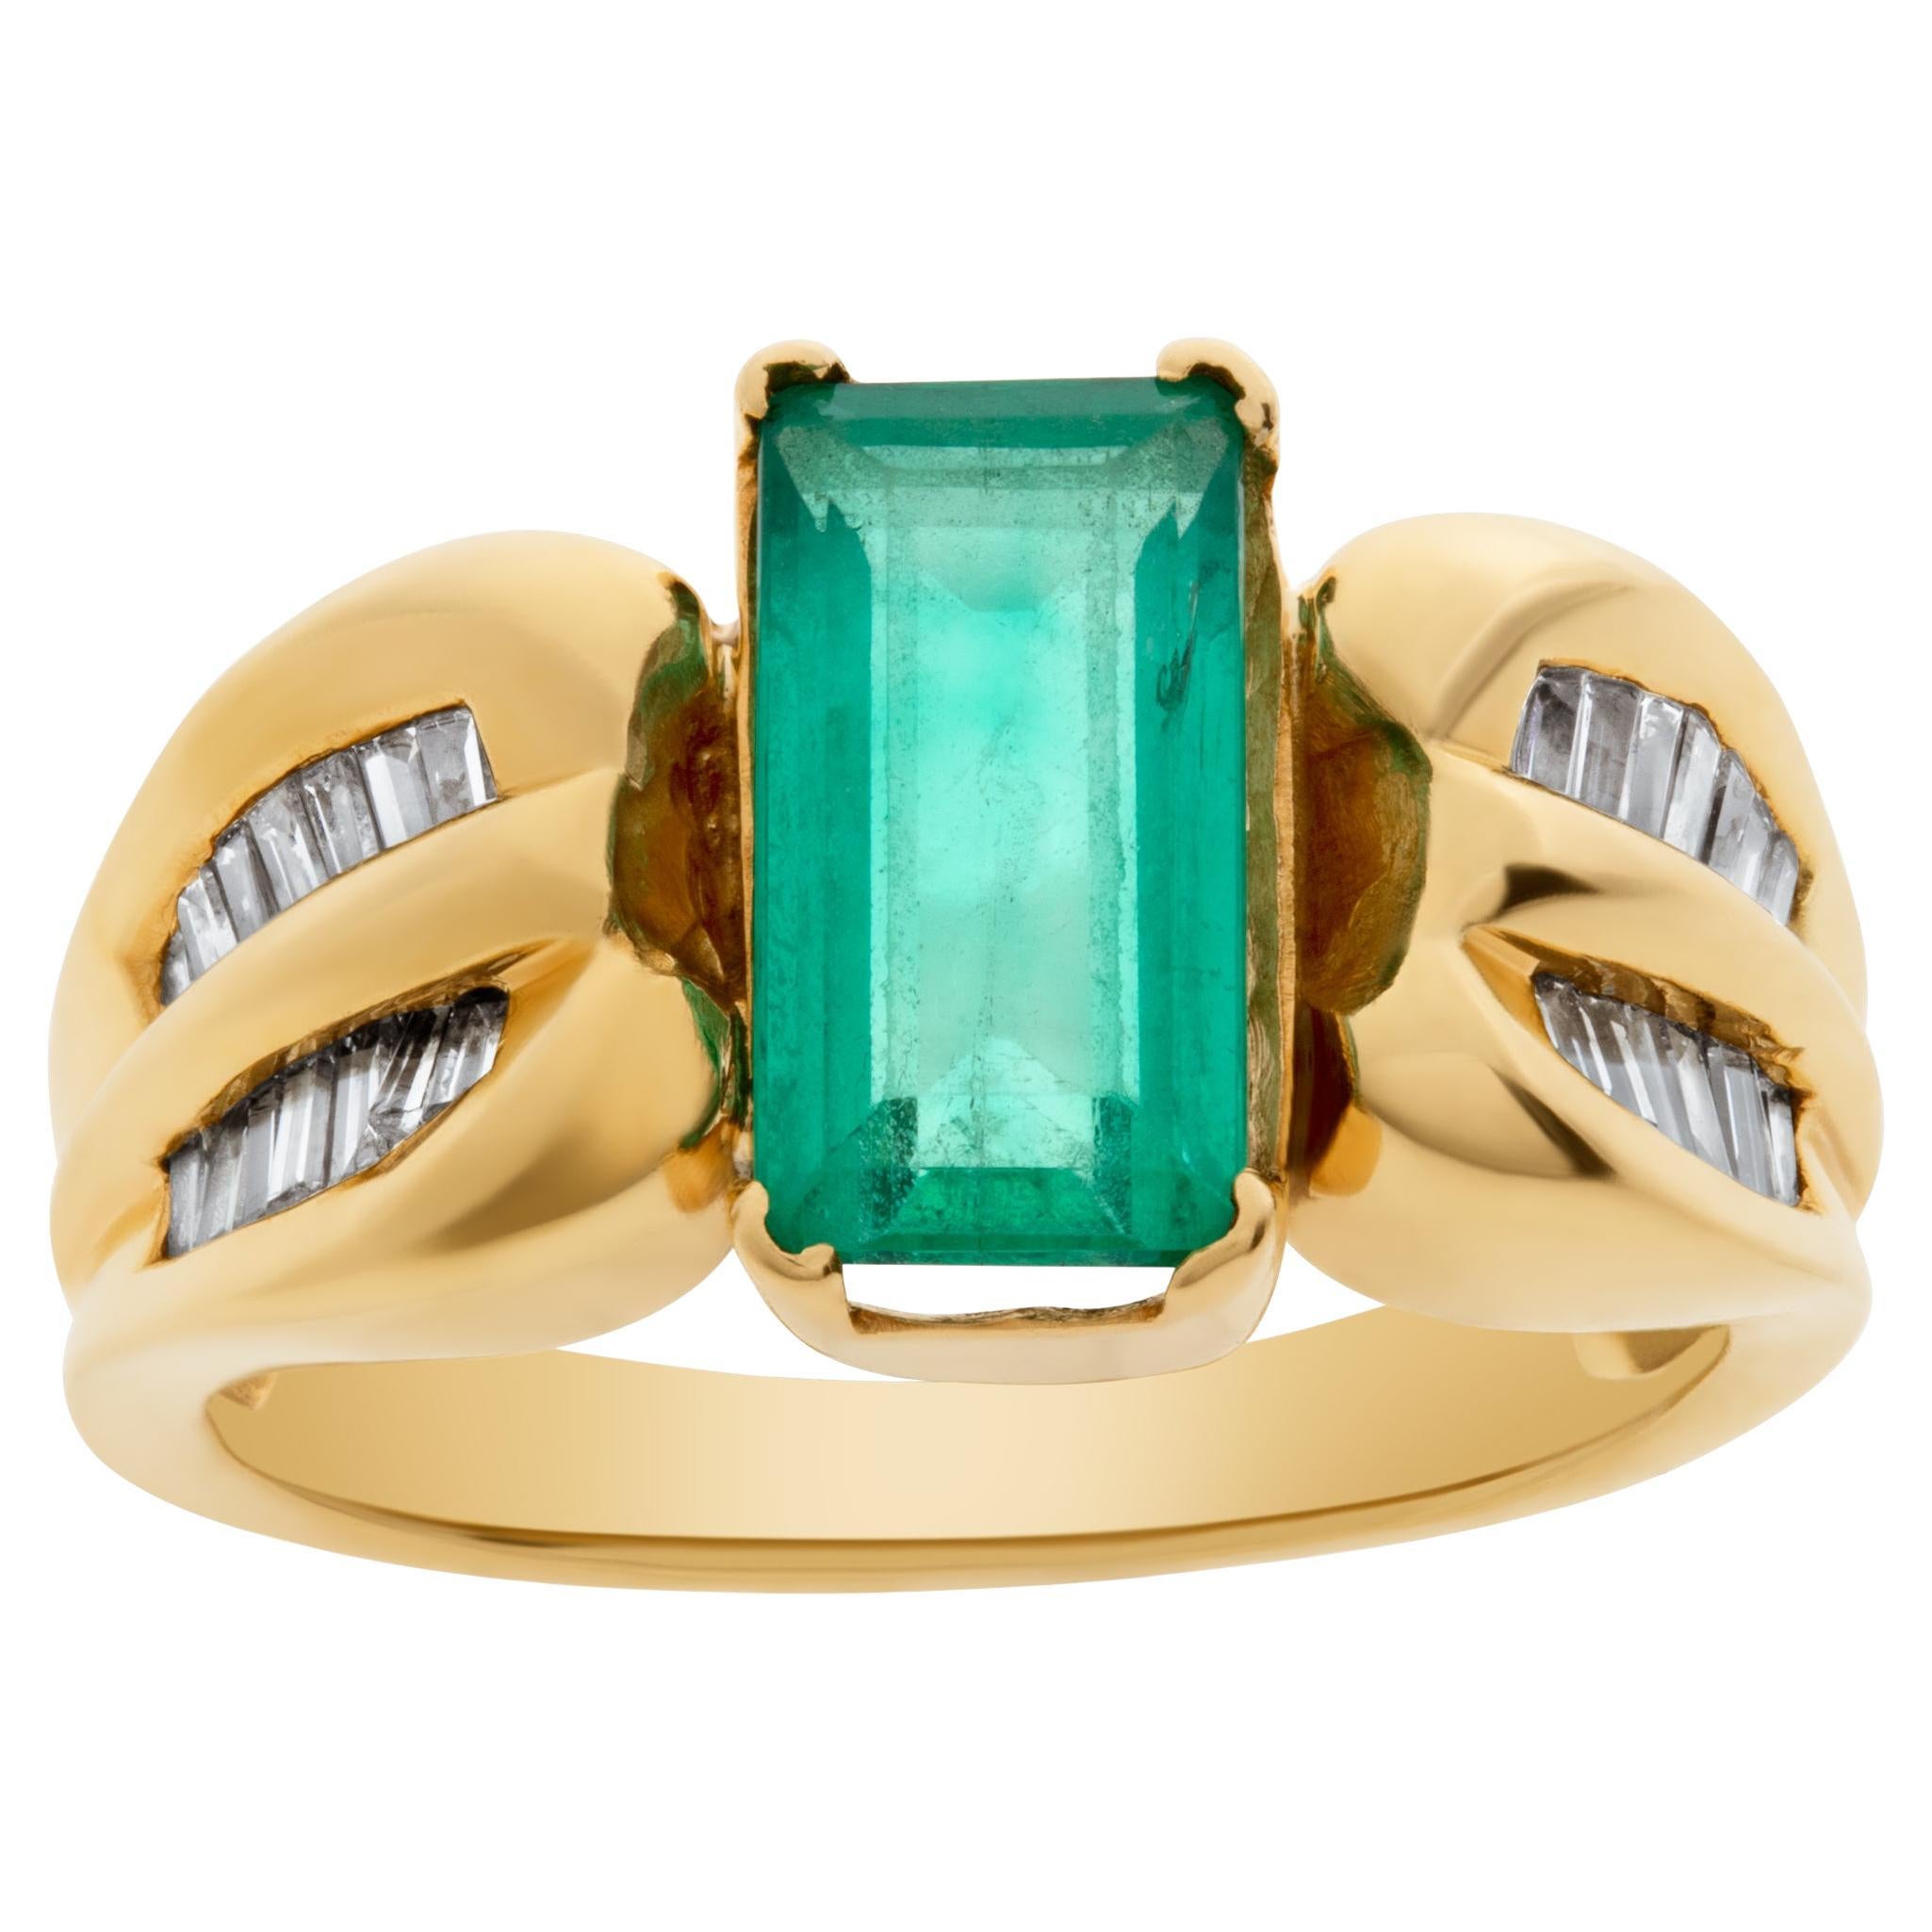 Emerald Ring in 18k Yellow Gold with Baguette Cut Diamond Accents